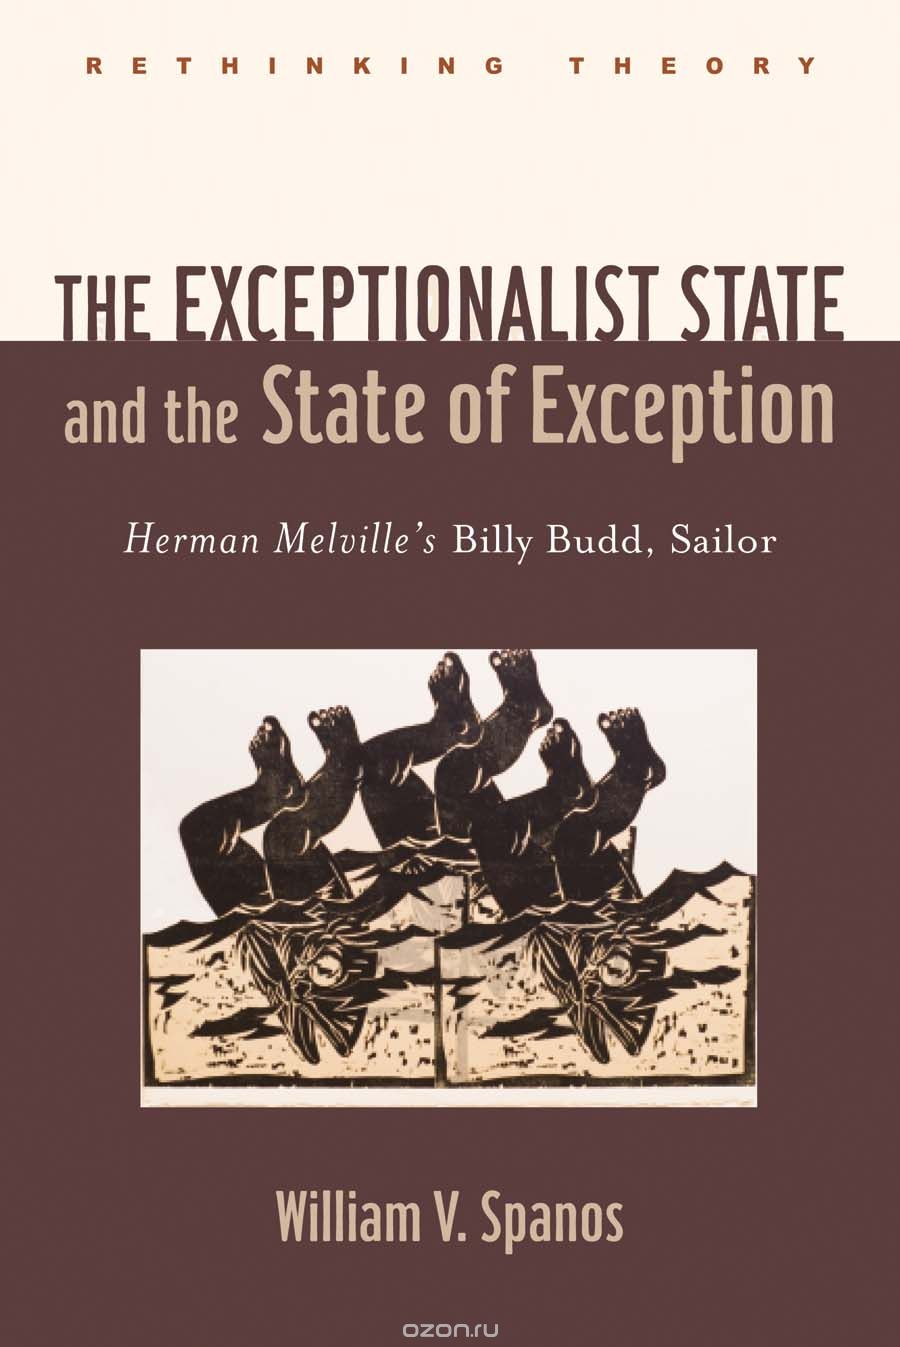 Скачать книгу "The Exceptionalist State and the State of Exception – Herman Melville?s Billy Budd, Sailor"